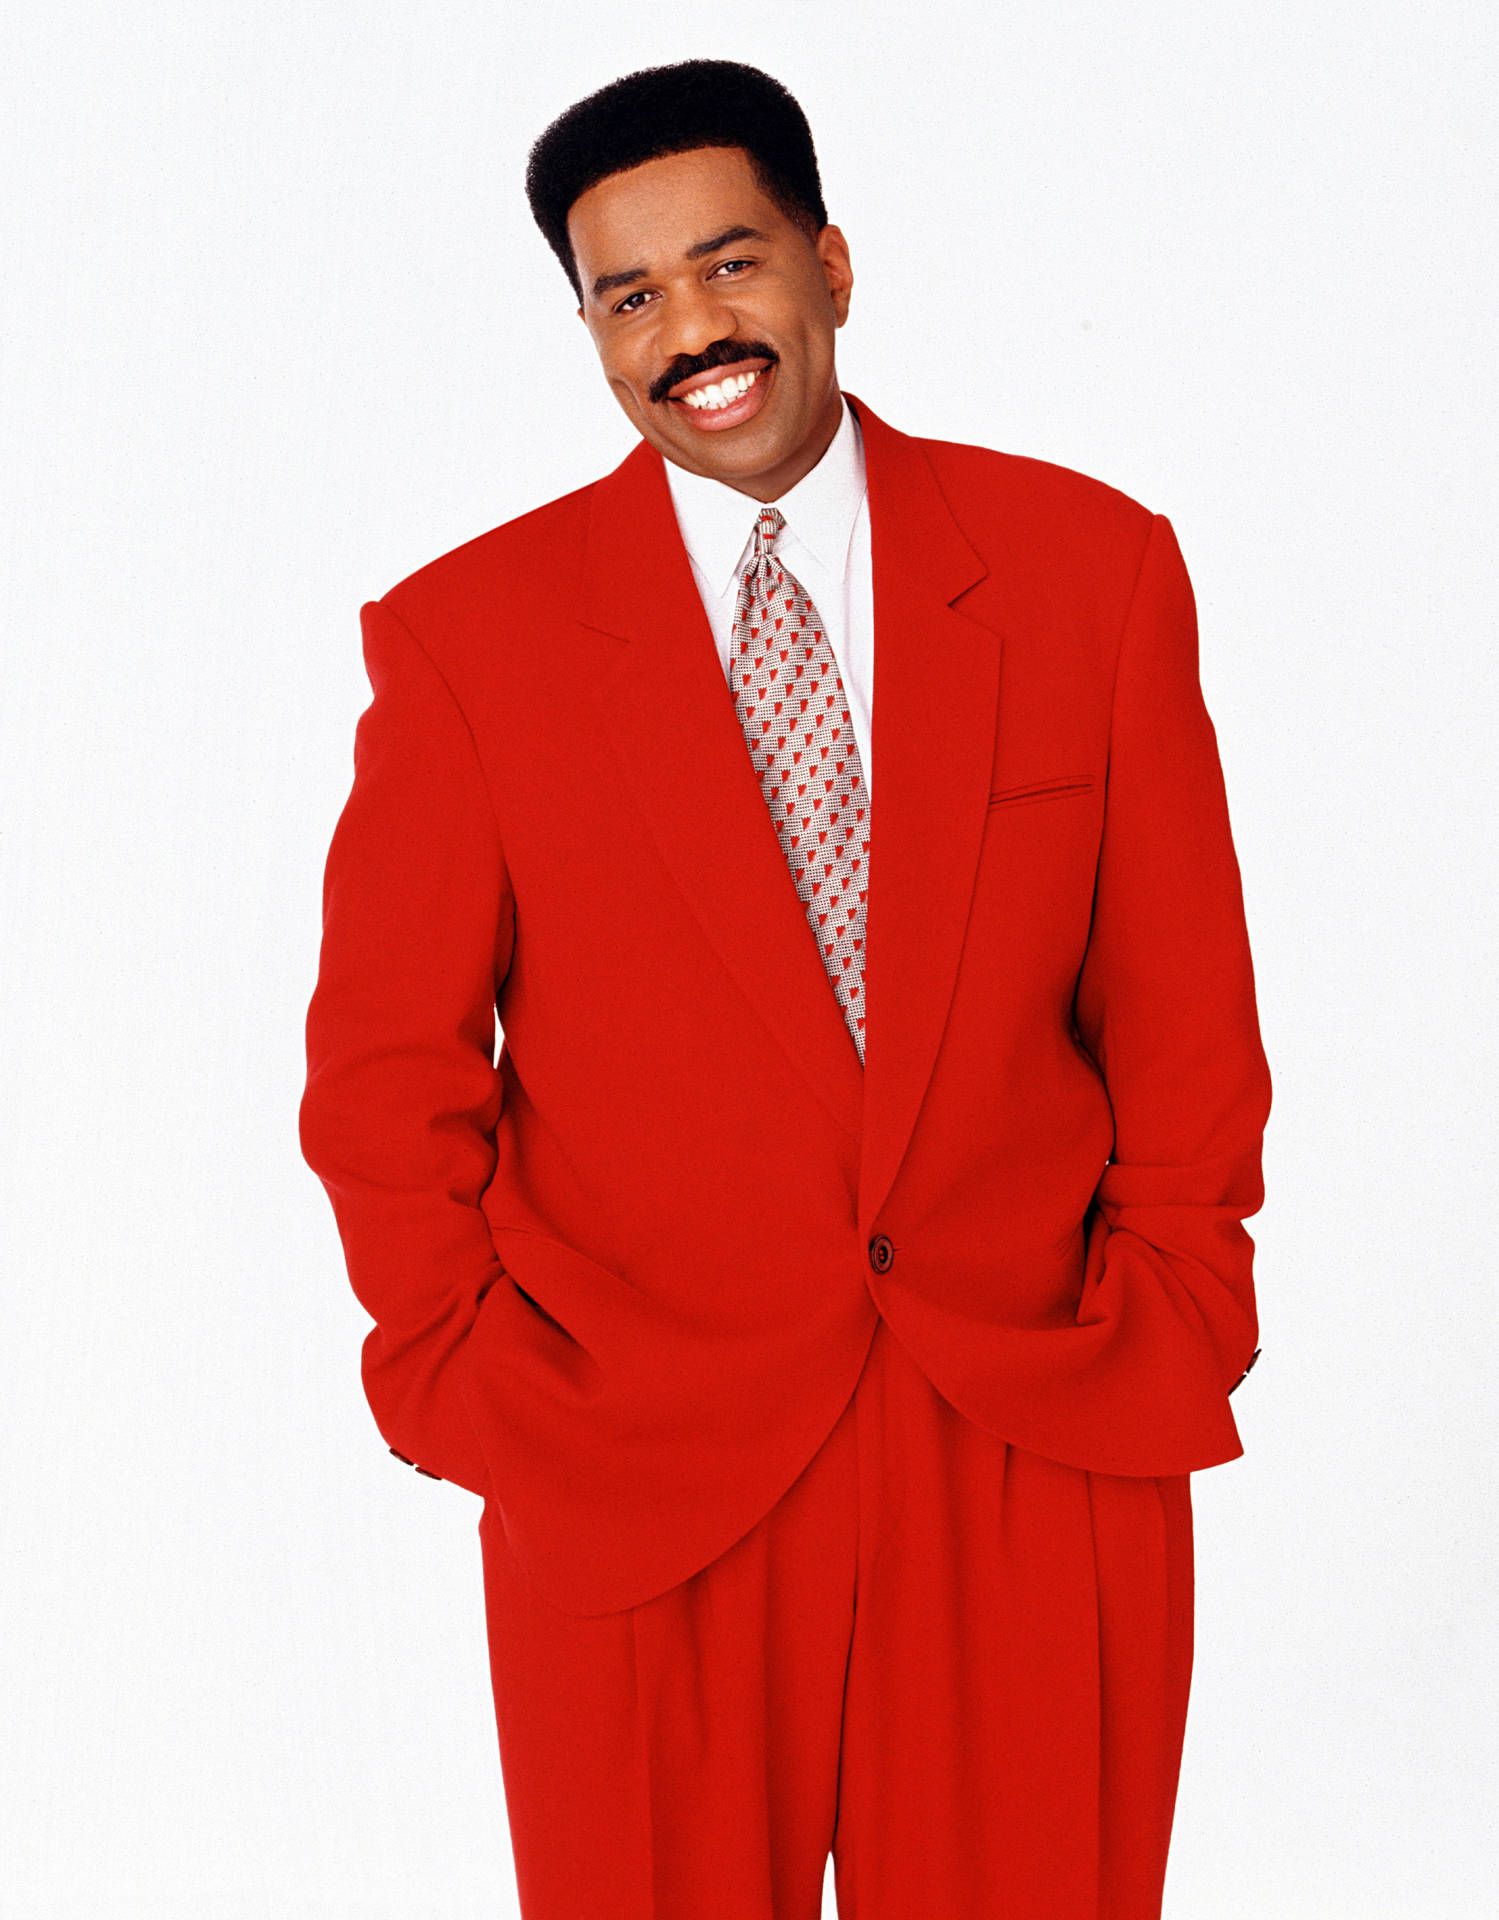 Steve Harvey Smiling In A Red Suit Wallpaper